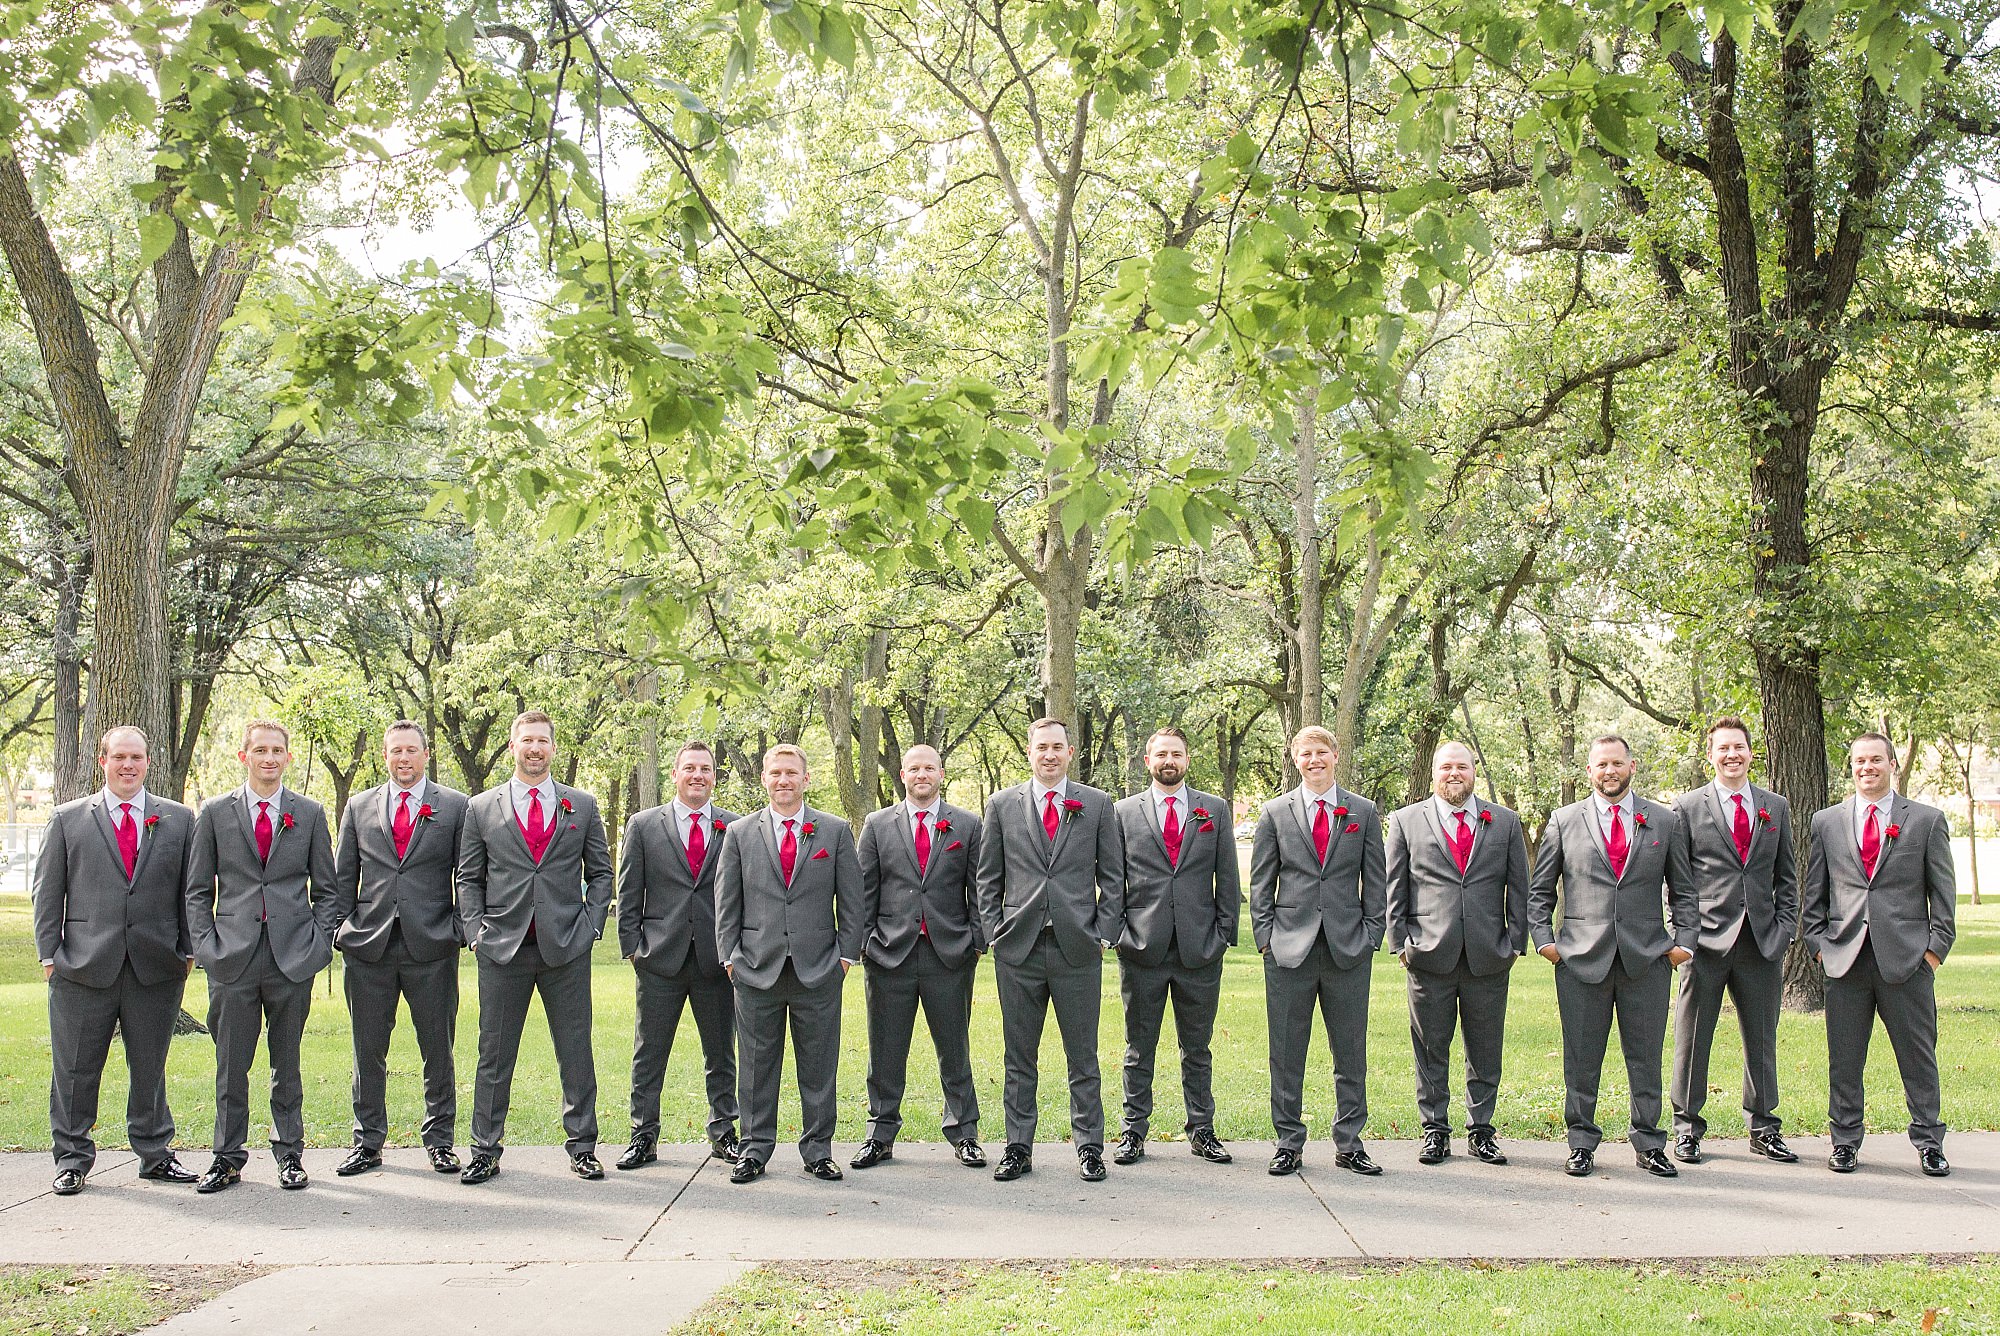 A large group of groomsmen with grey suits and red ties